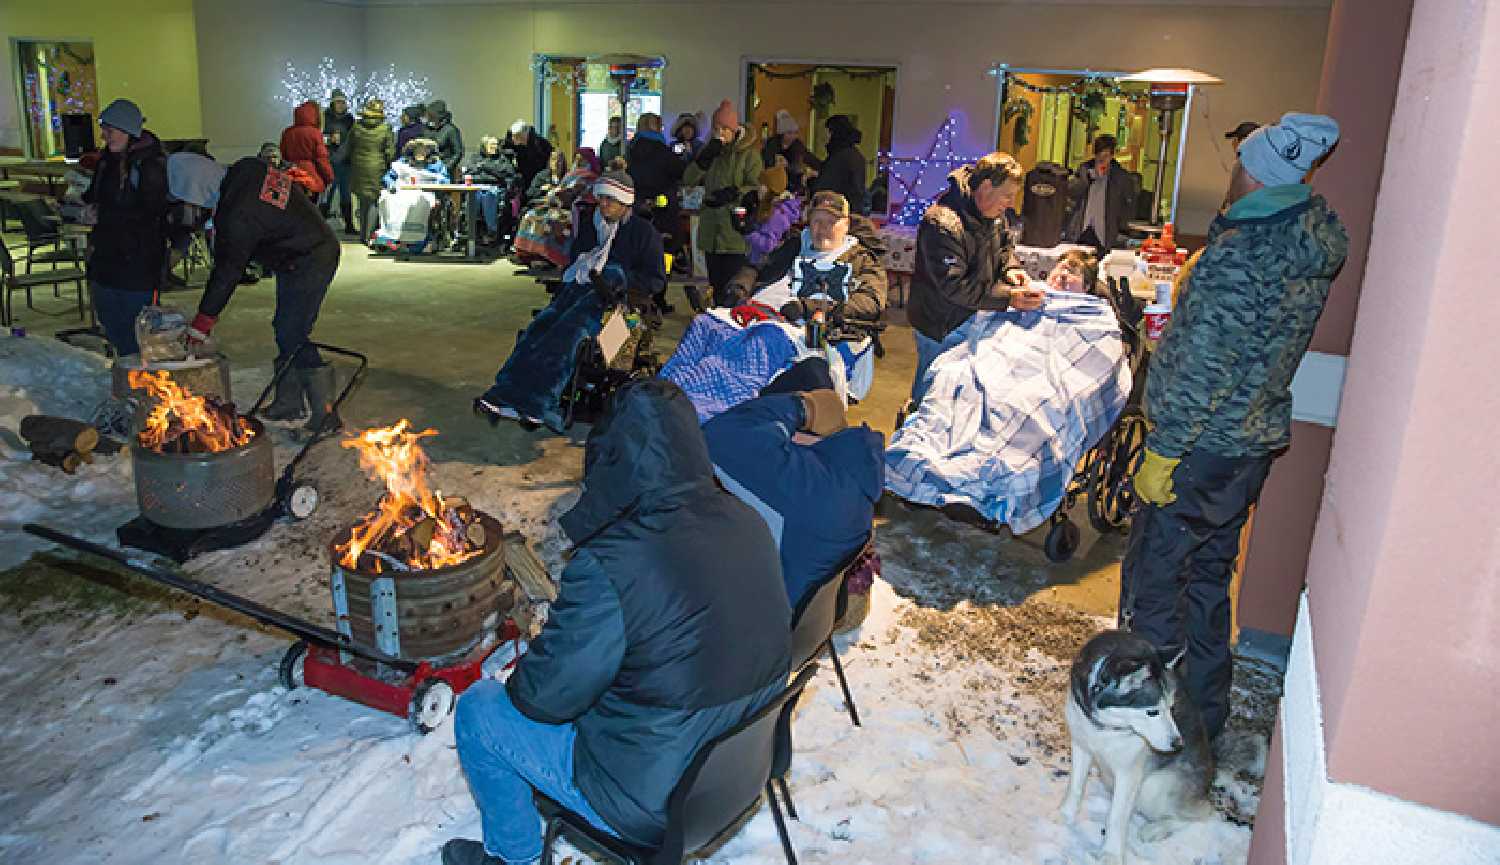 The Sparkle of Life Tree Lighting Ceremony last year in front of the South East Integrated Care Centre. There were bonfires, hot chocolate, a raffle table, and the lighting of the trees. The event was a fundraiser for the Moosomin Long Term Care and Health Care Foundation.